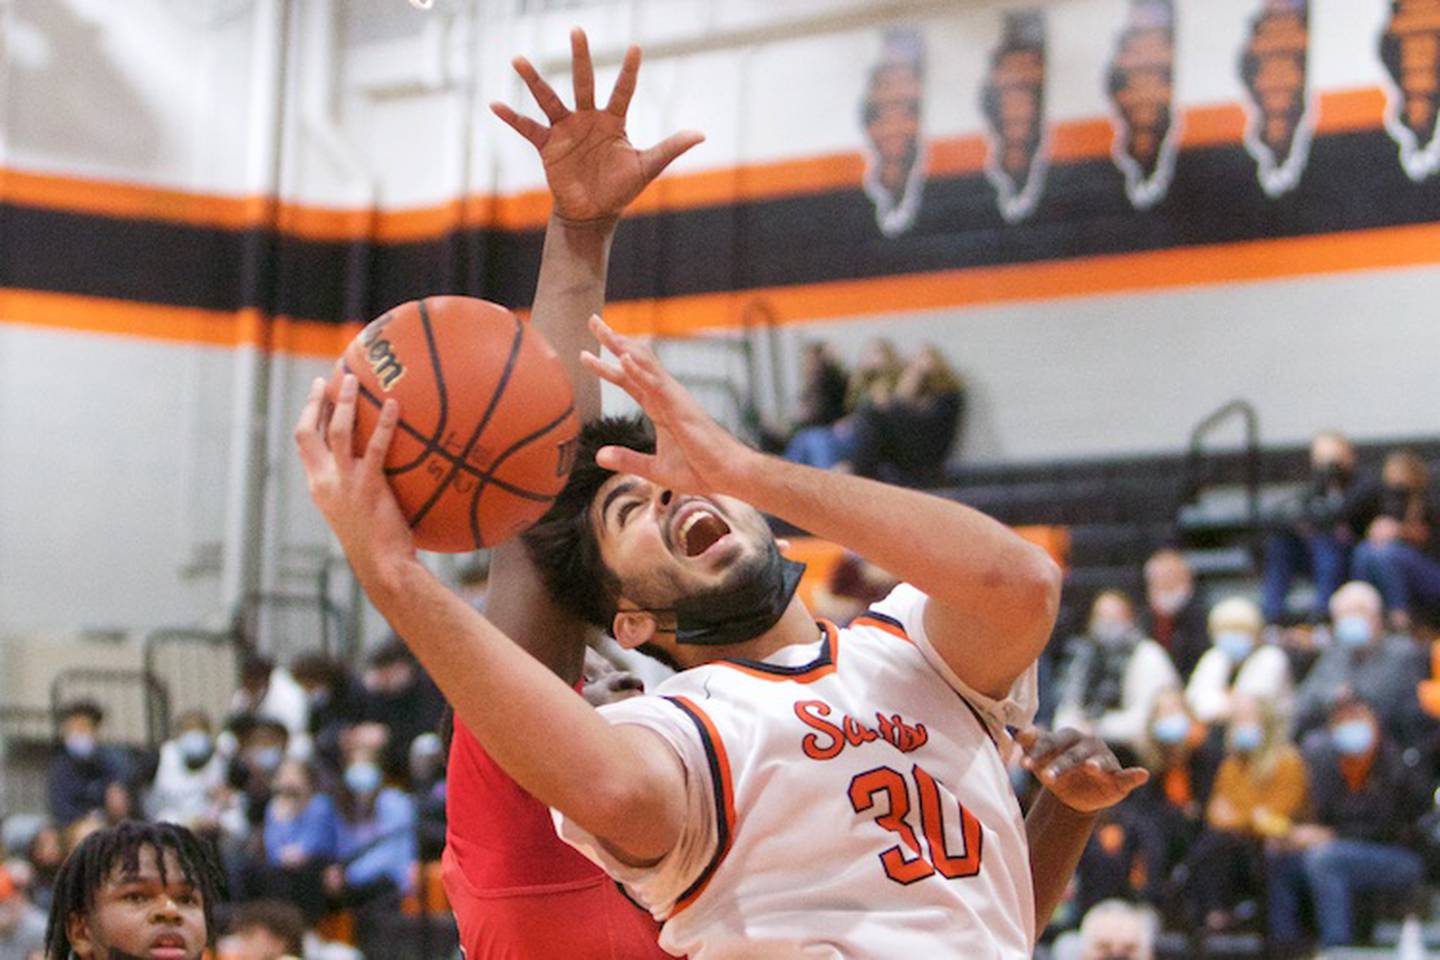 St. Charles East's Rahul Gor goes in for the basket against East Aurora at the 62ND Annual Ron Johnson Thanksgiving Tournament on Nov.22, 2021 in St. Charles.